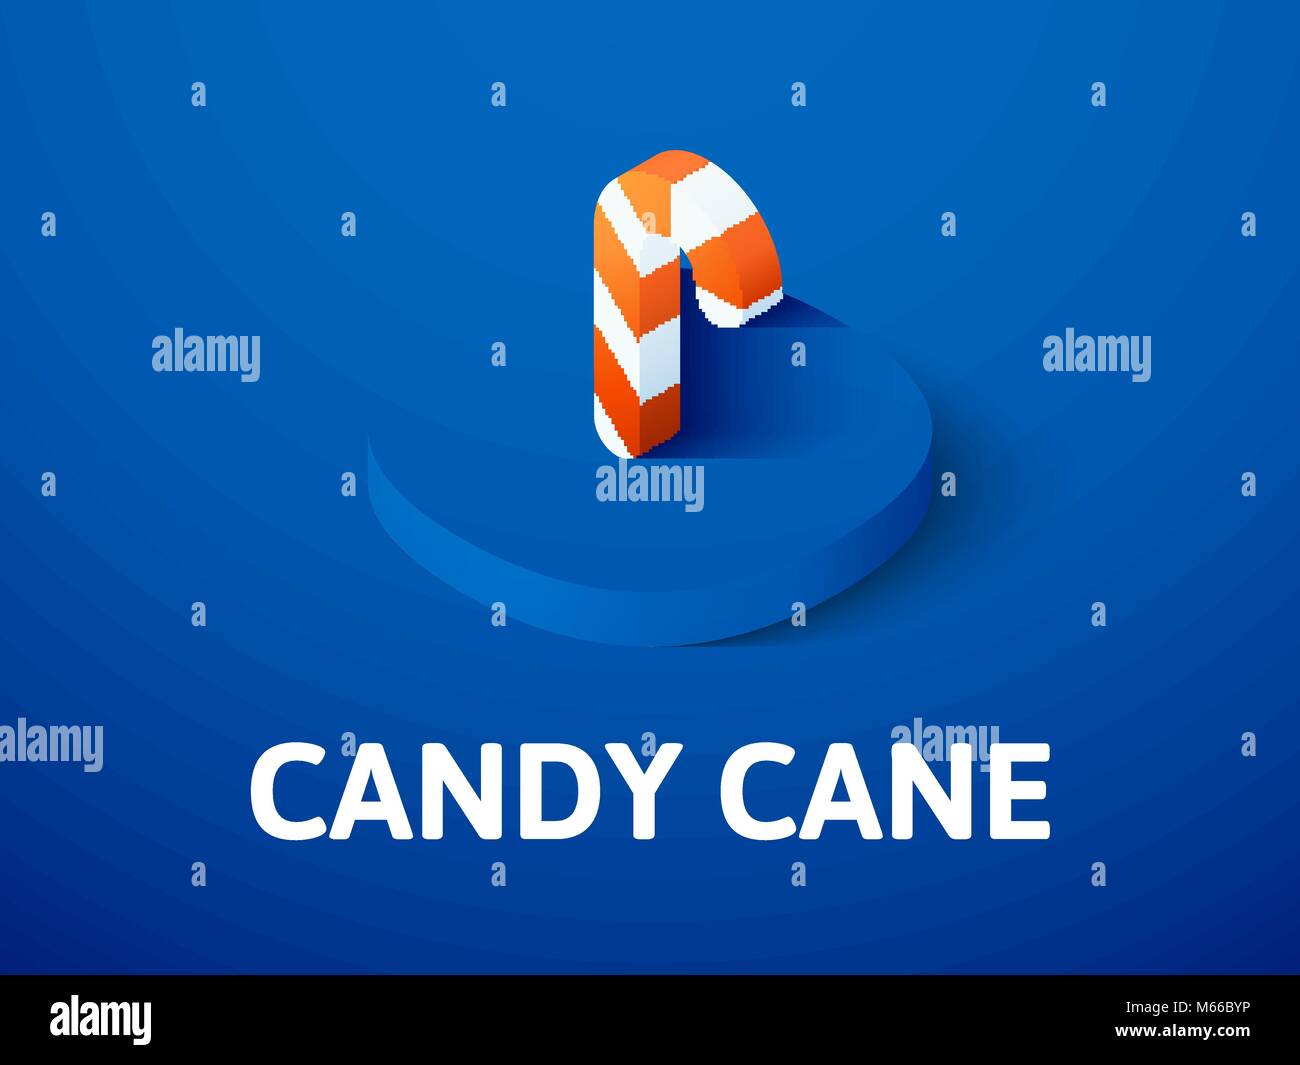 Candy cane isometric icon, isolated on color background Stock Vector